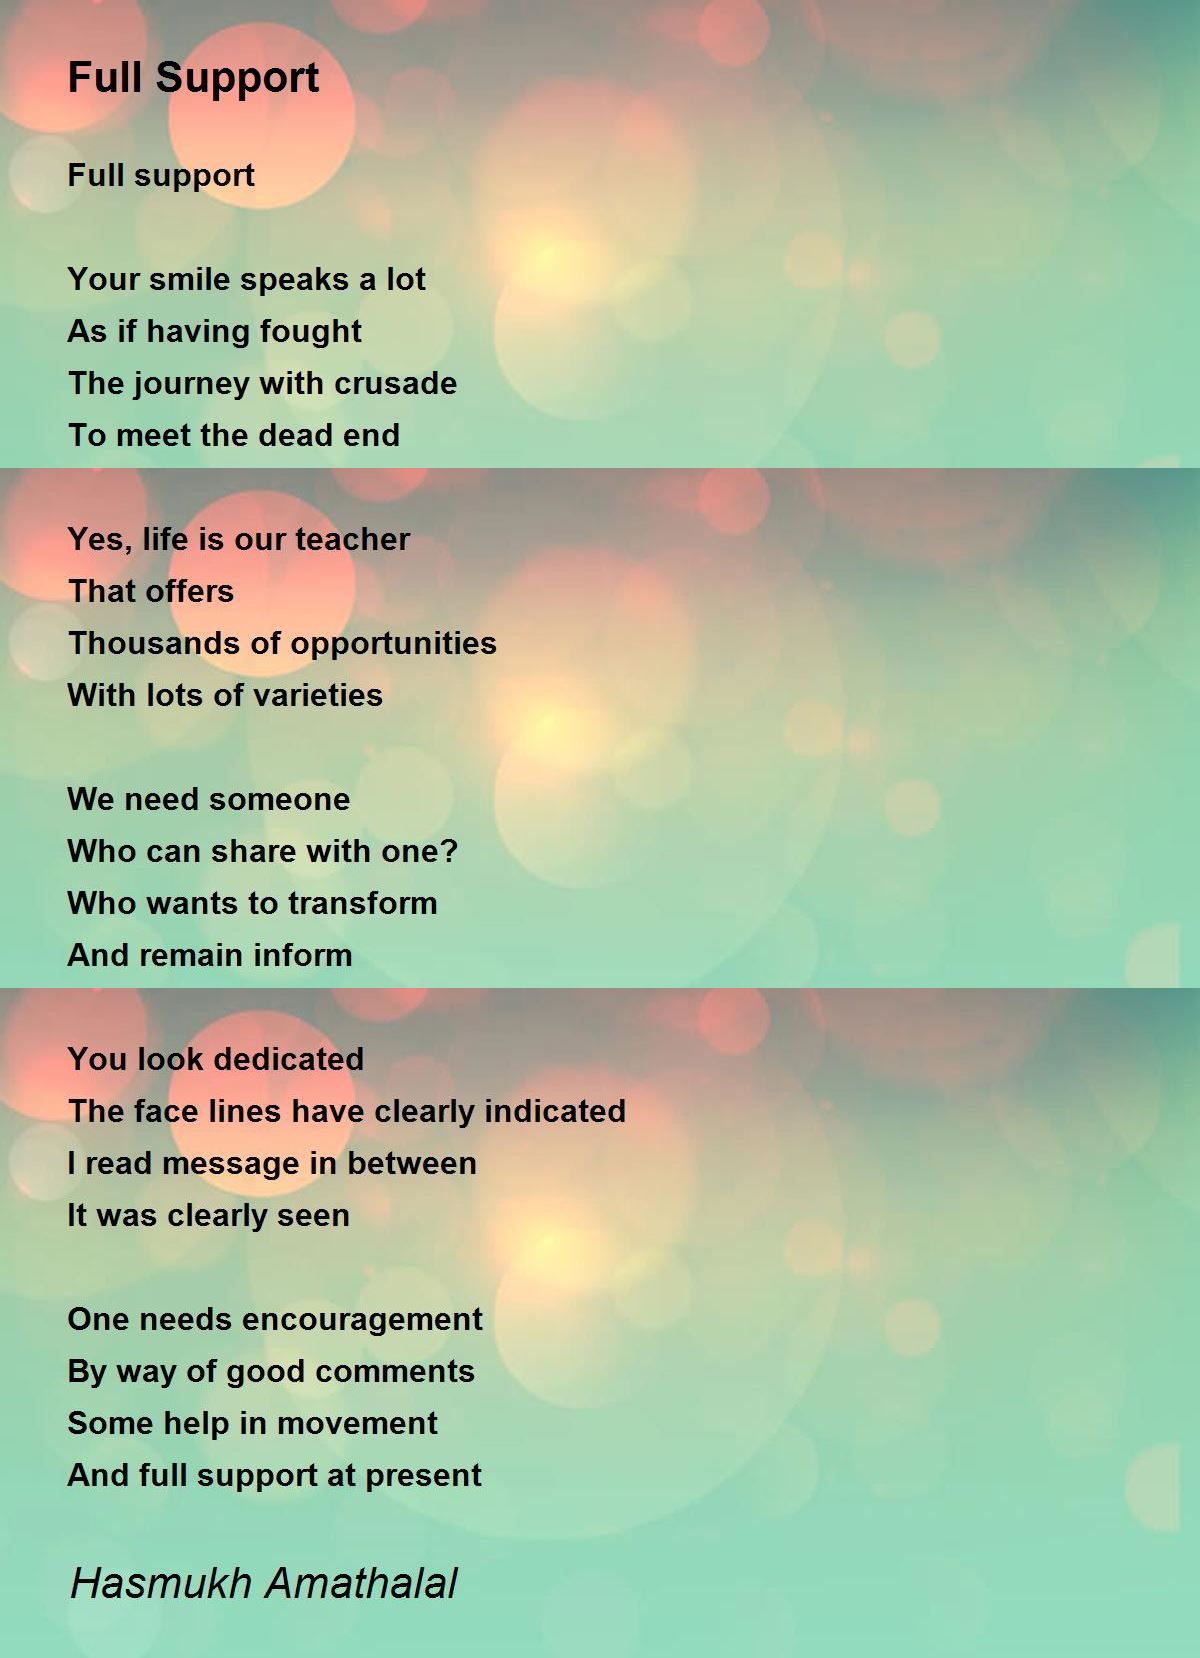 Full Support by Mehta Hasmukh Amathalal - Full Support Poem